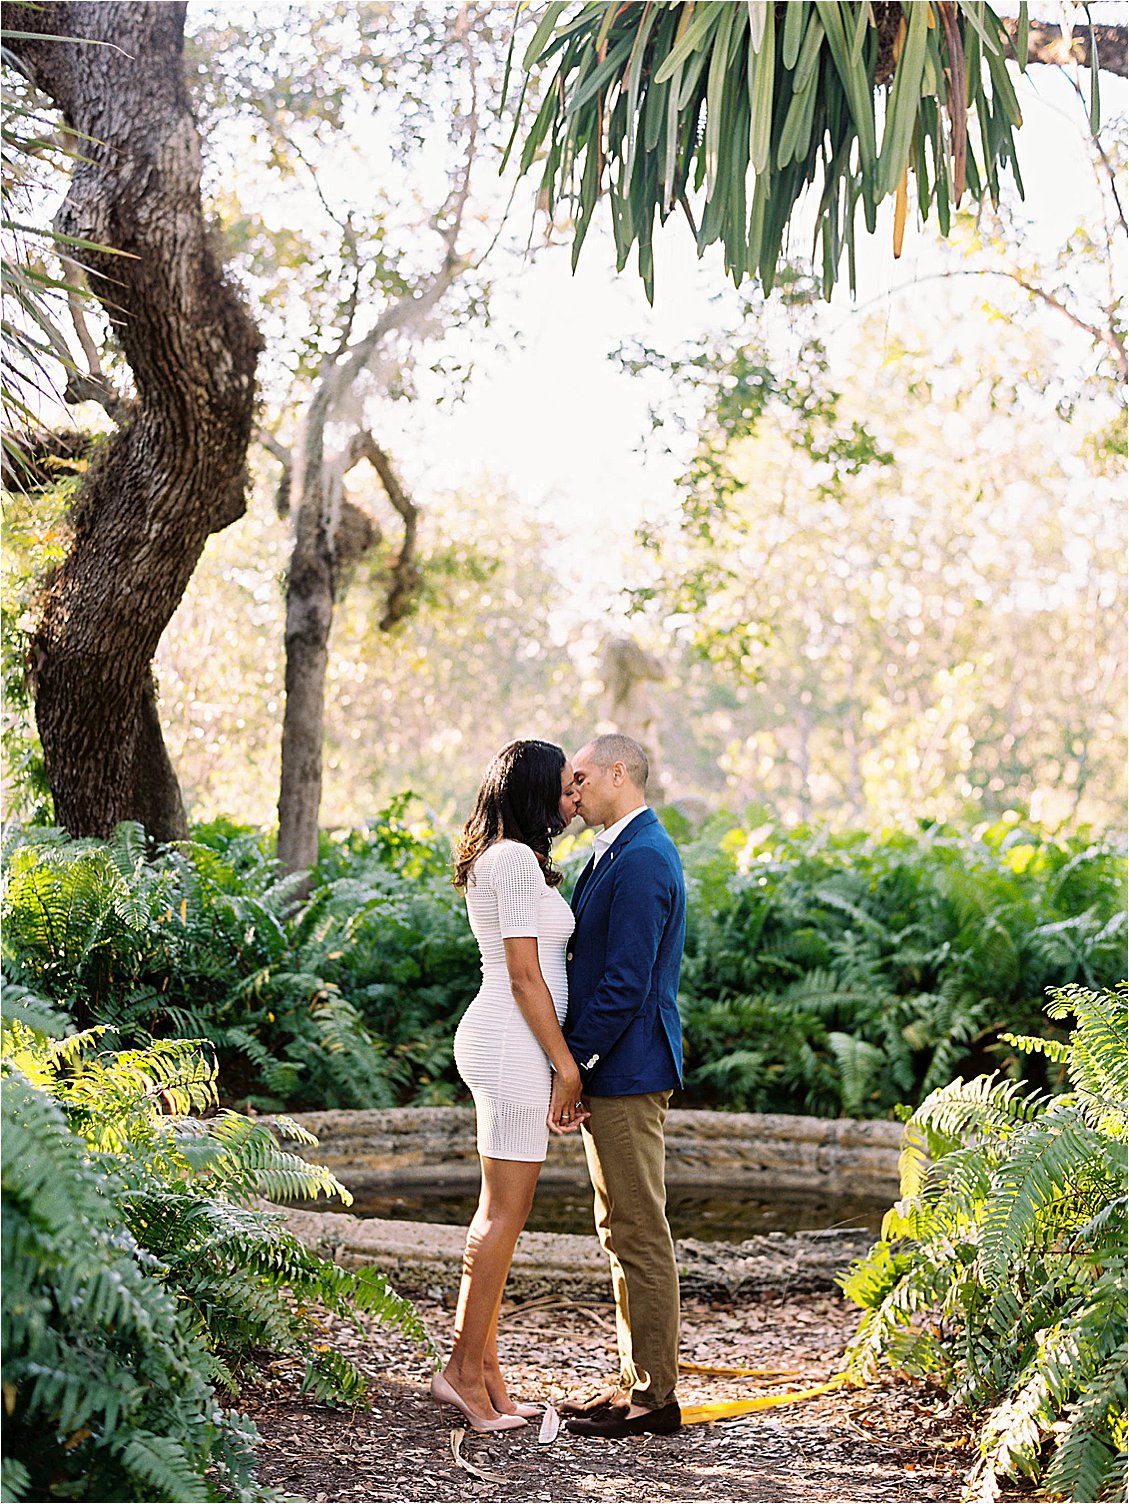 Tropical Anniversary Session at Vizcaya on Film photographed by South Florida Film Wedding Photographer, Renee Hollingshead